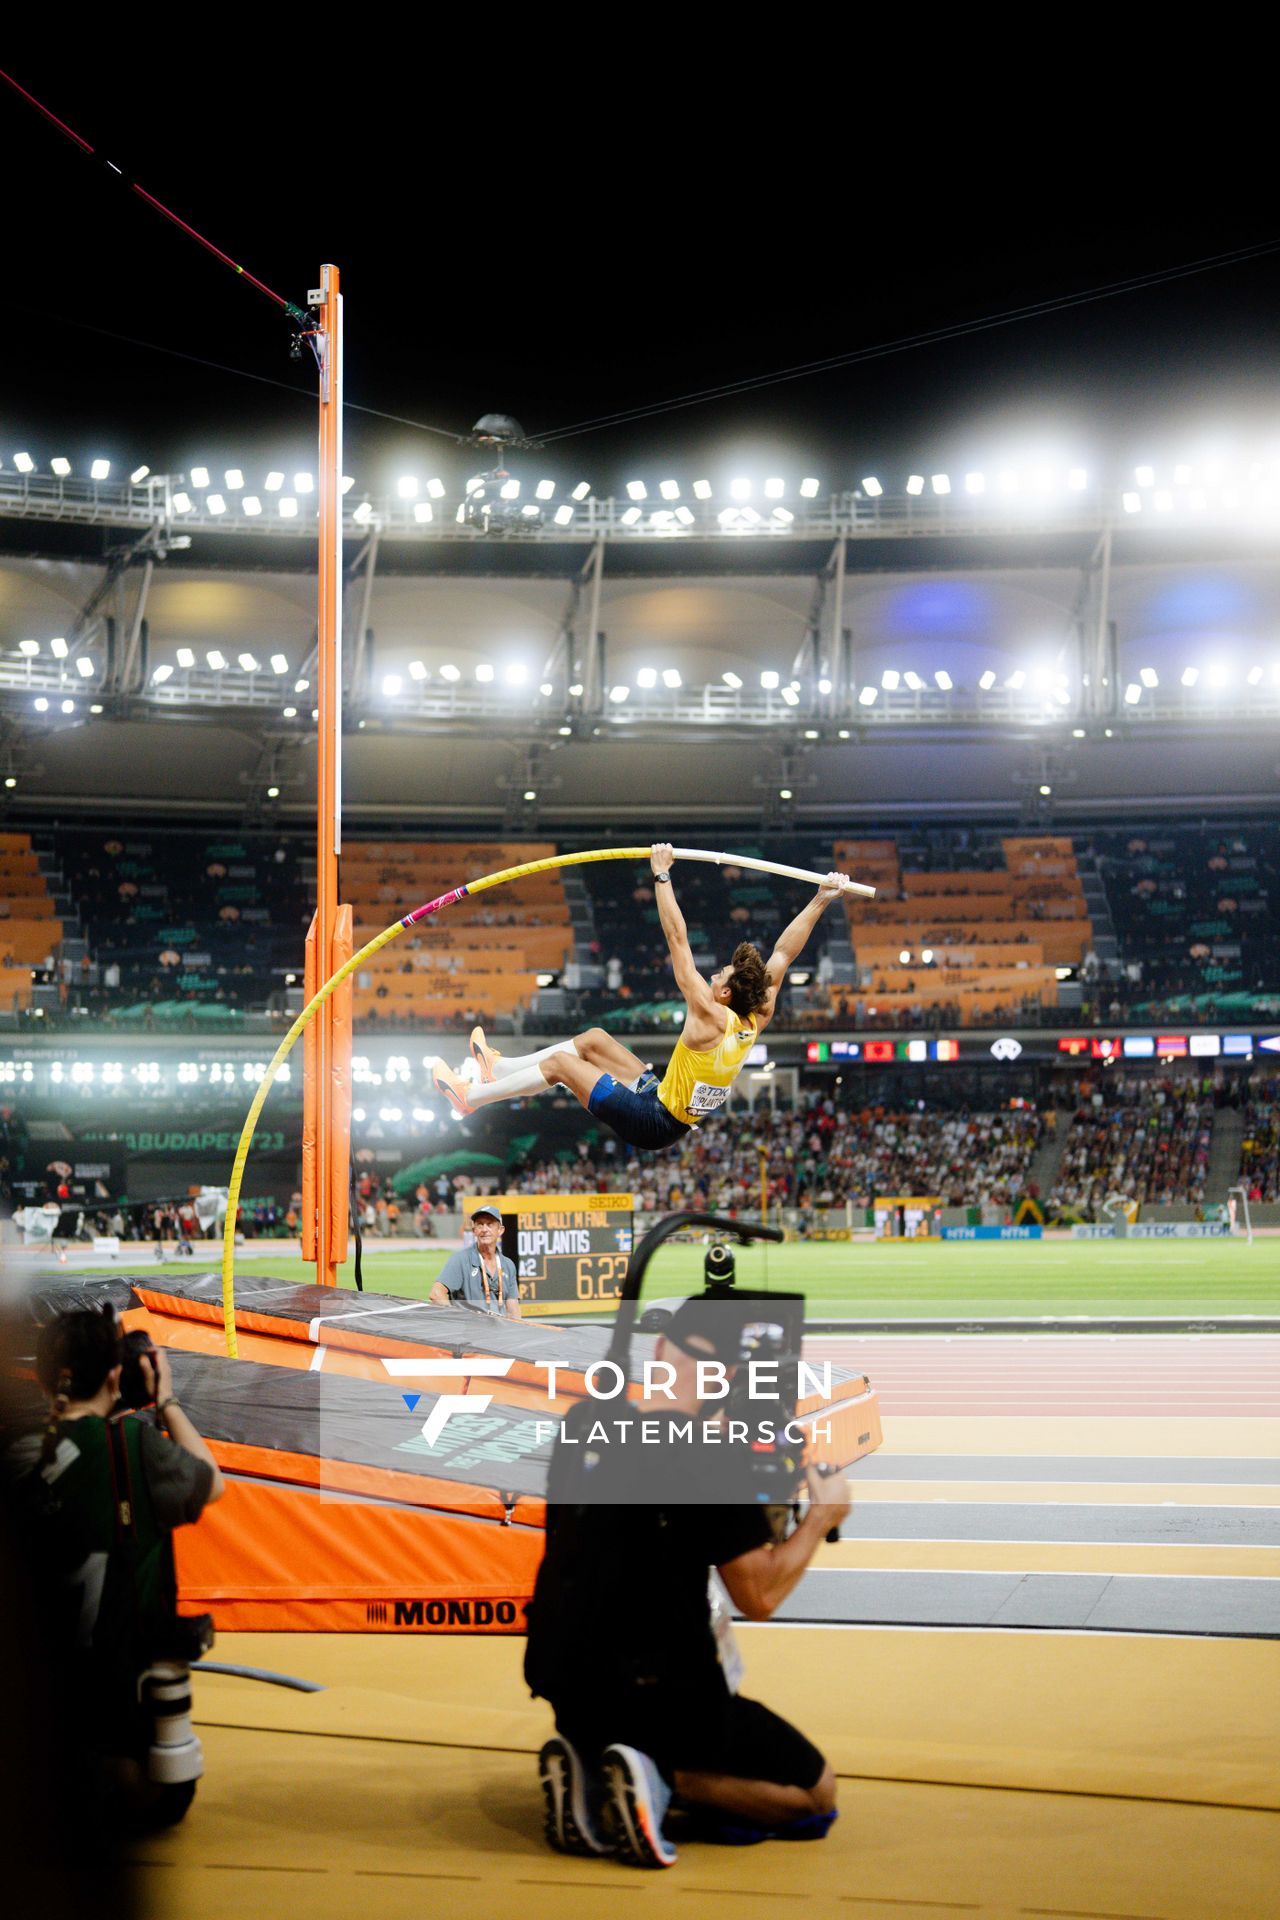 Armand Duplantis (SWE/Sweden) during the Pole Vault on Day 8 of the World Athletics Championships Budapest 23 at the National Athletics Centre in Budapest, Hungary on August 26, 2023.